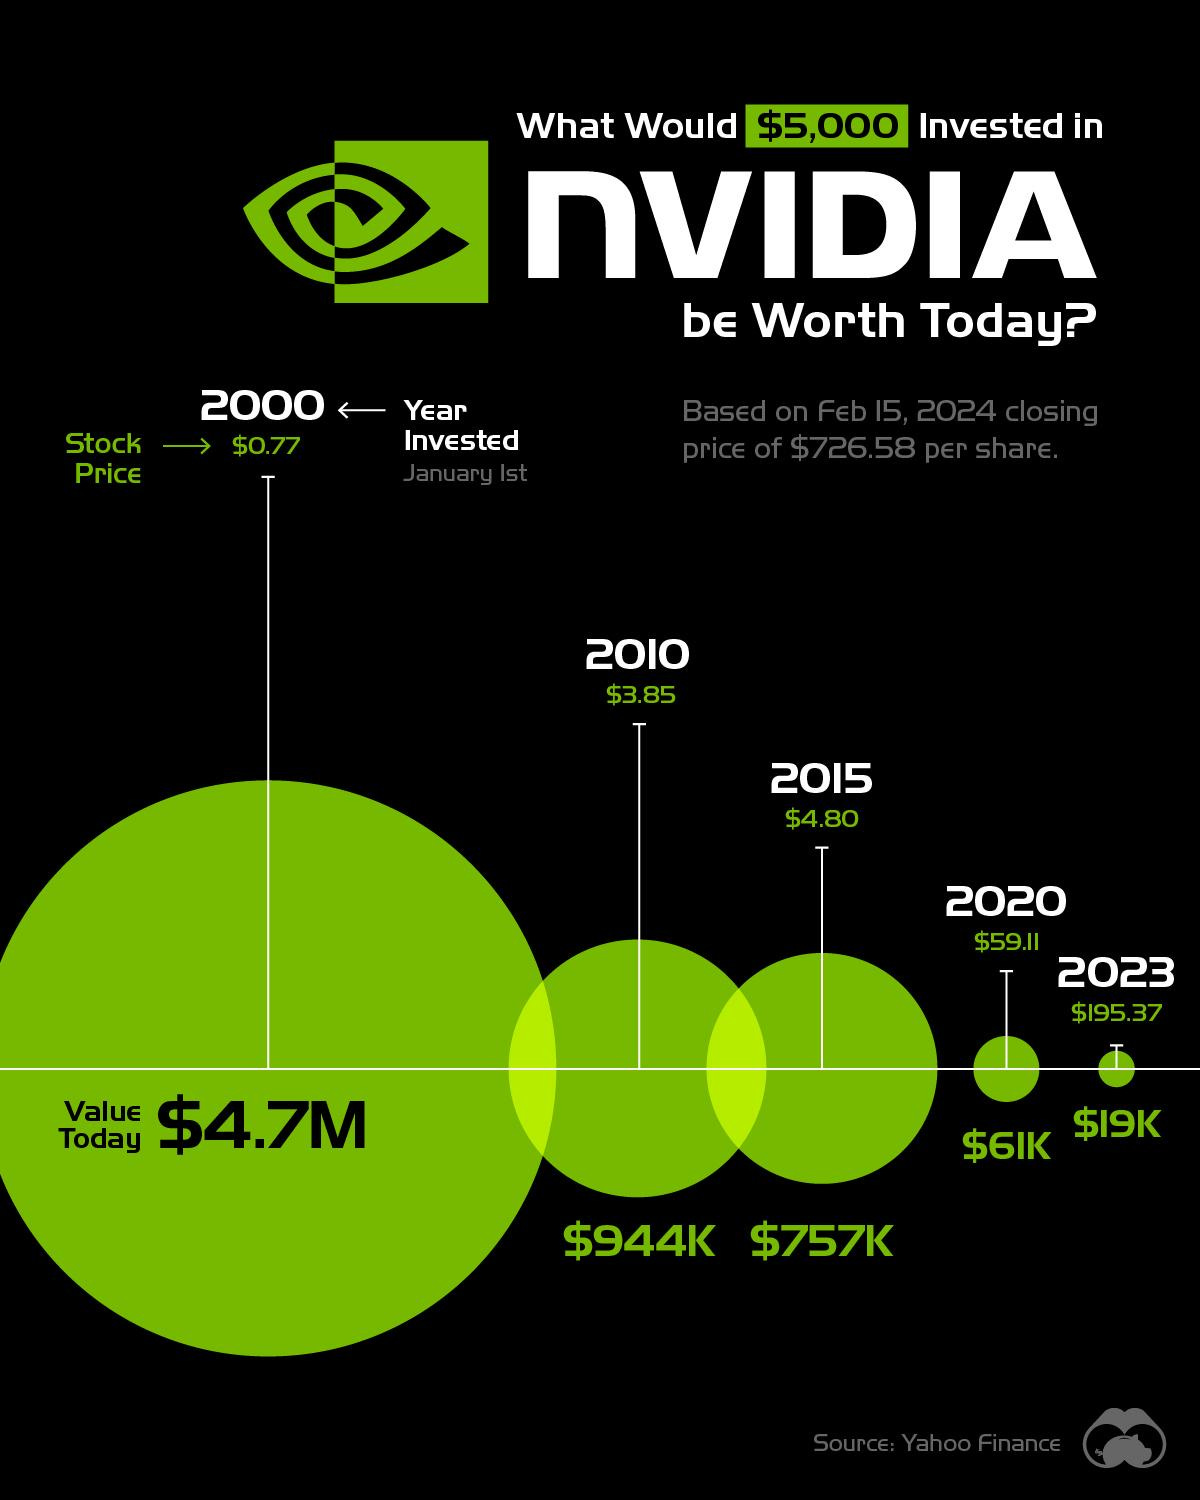 $5,000 Invested in NVIDIA in 2000 Would be Worth $4.7M Today 🚀